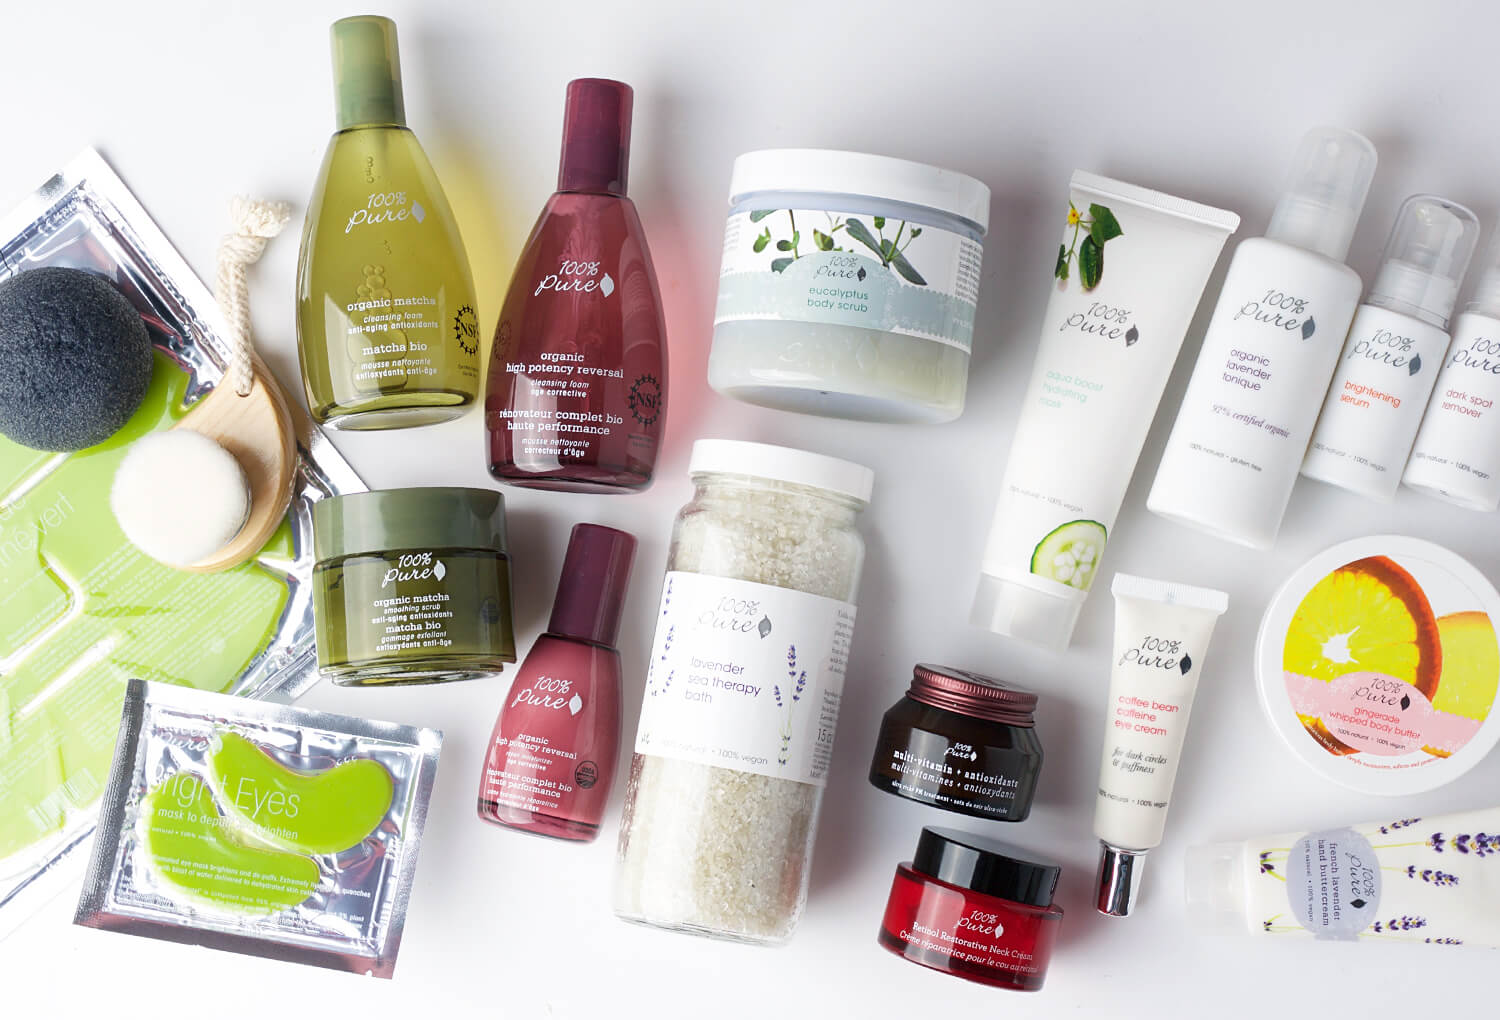 100% PURE Skin Care products from Katies' routine